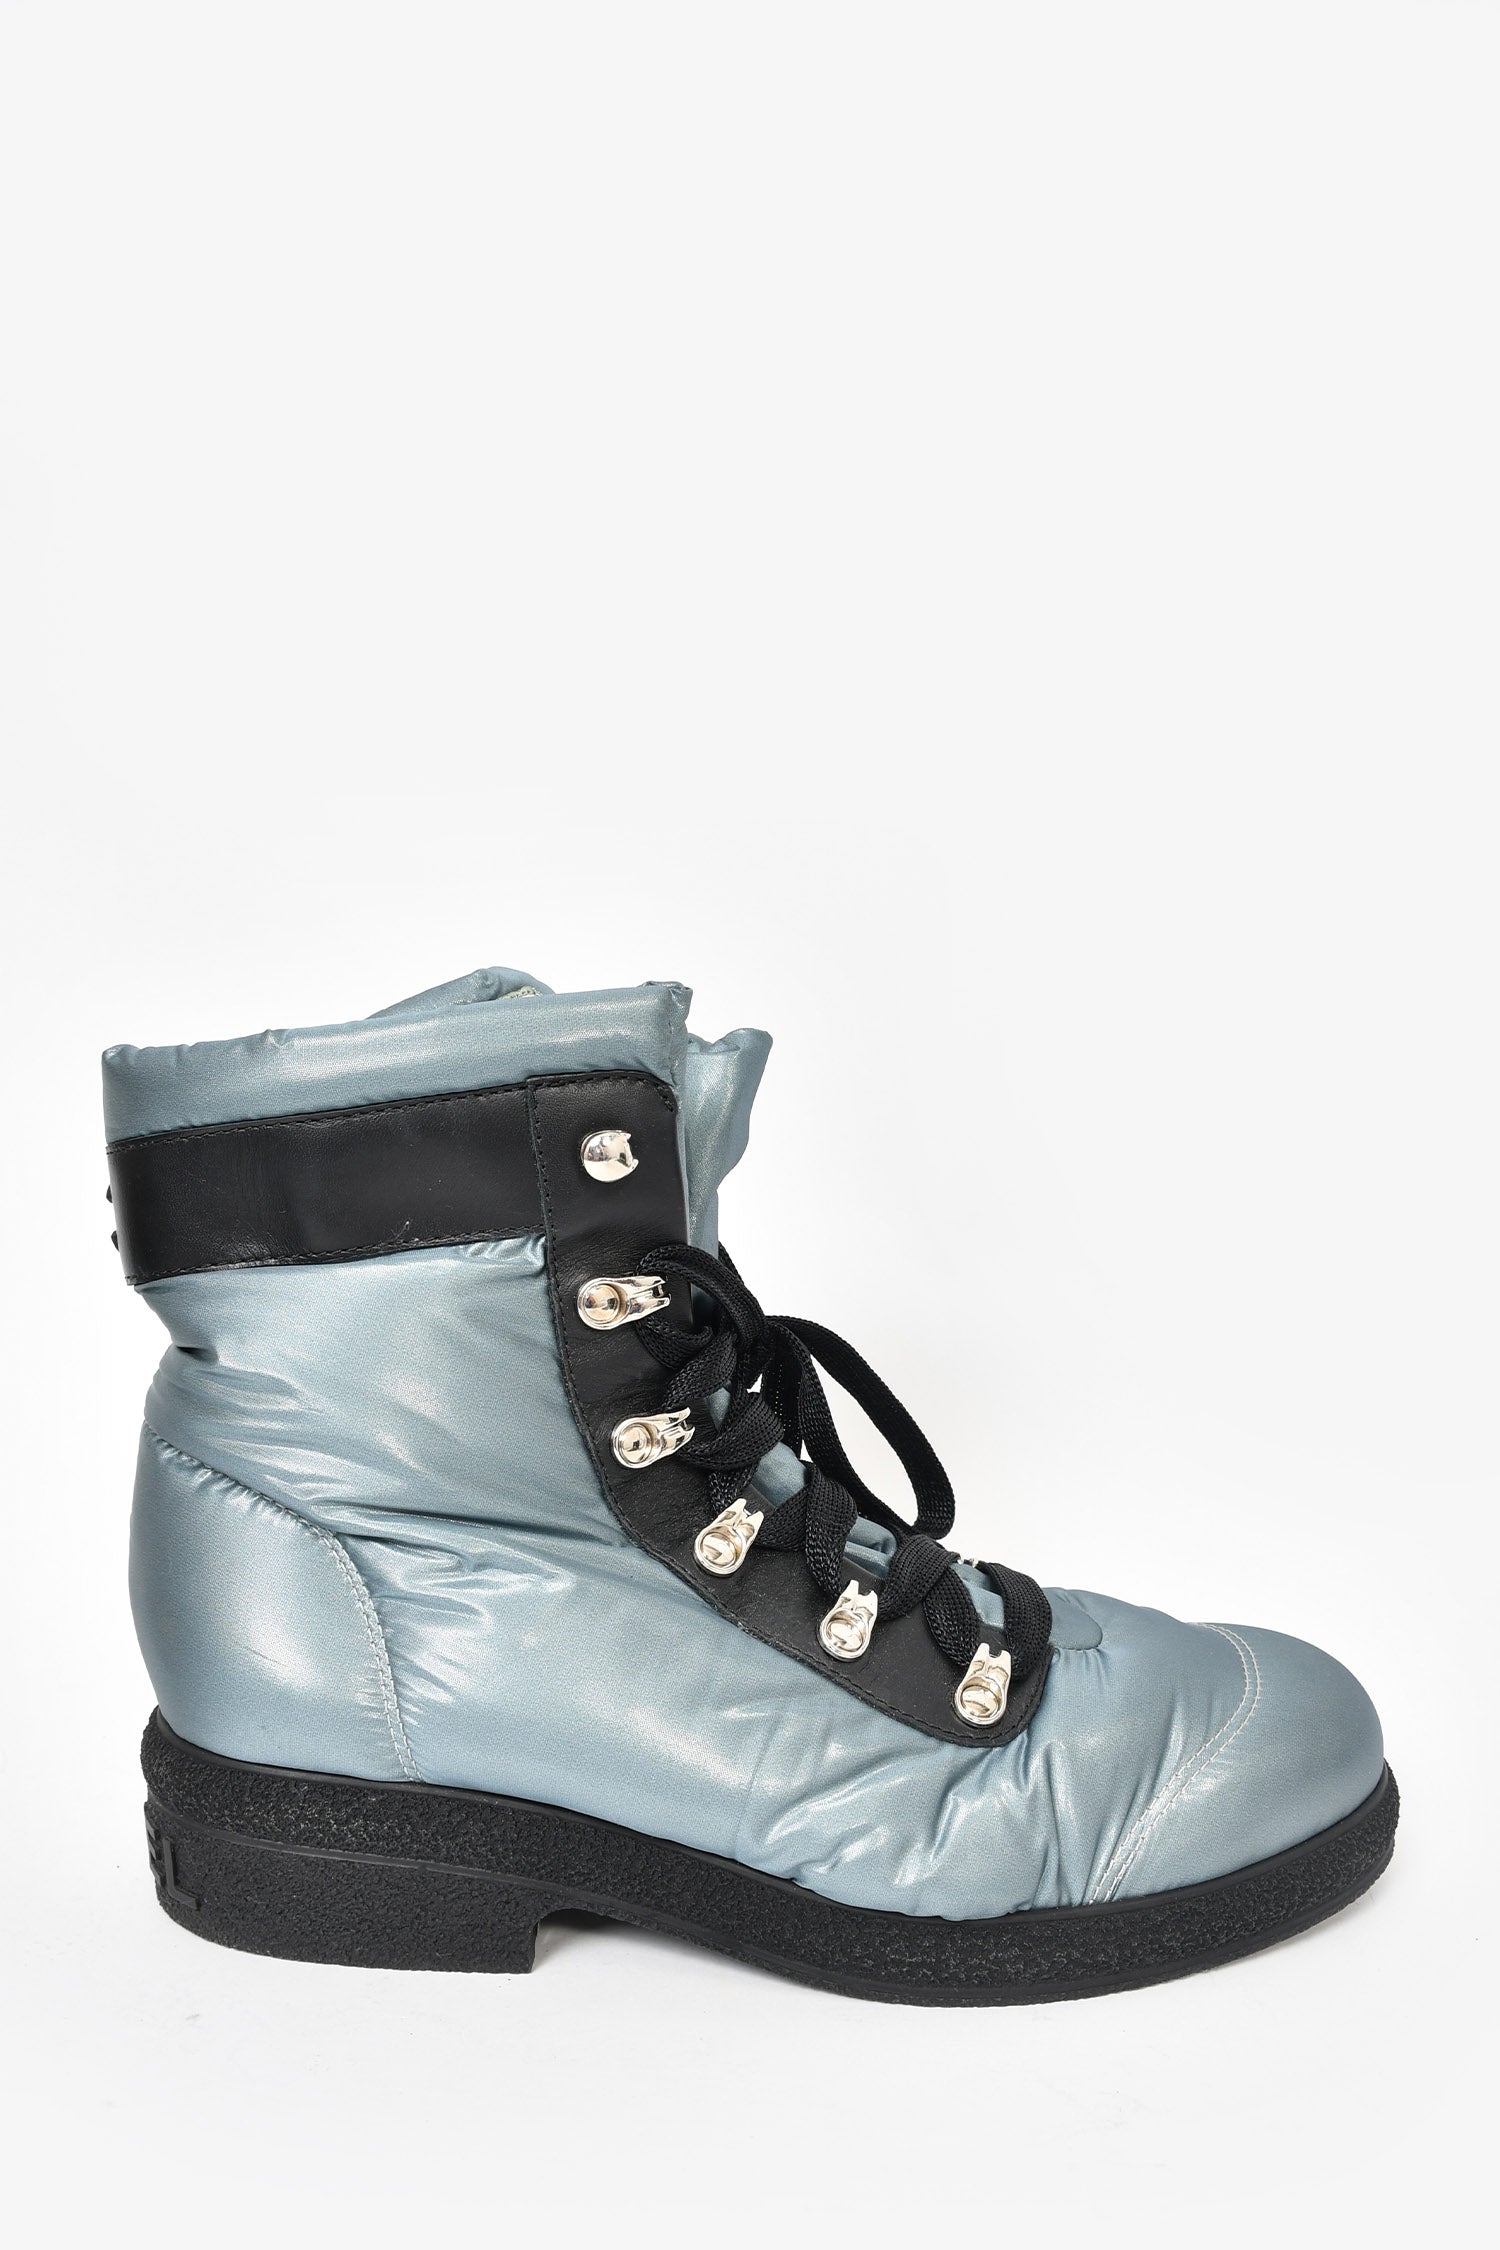 Chanel Shiny Teal Nylon 'Coco Neige' Combat Boots sz 38.5 – Lux